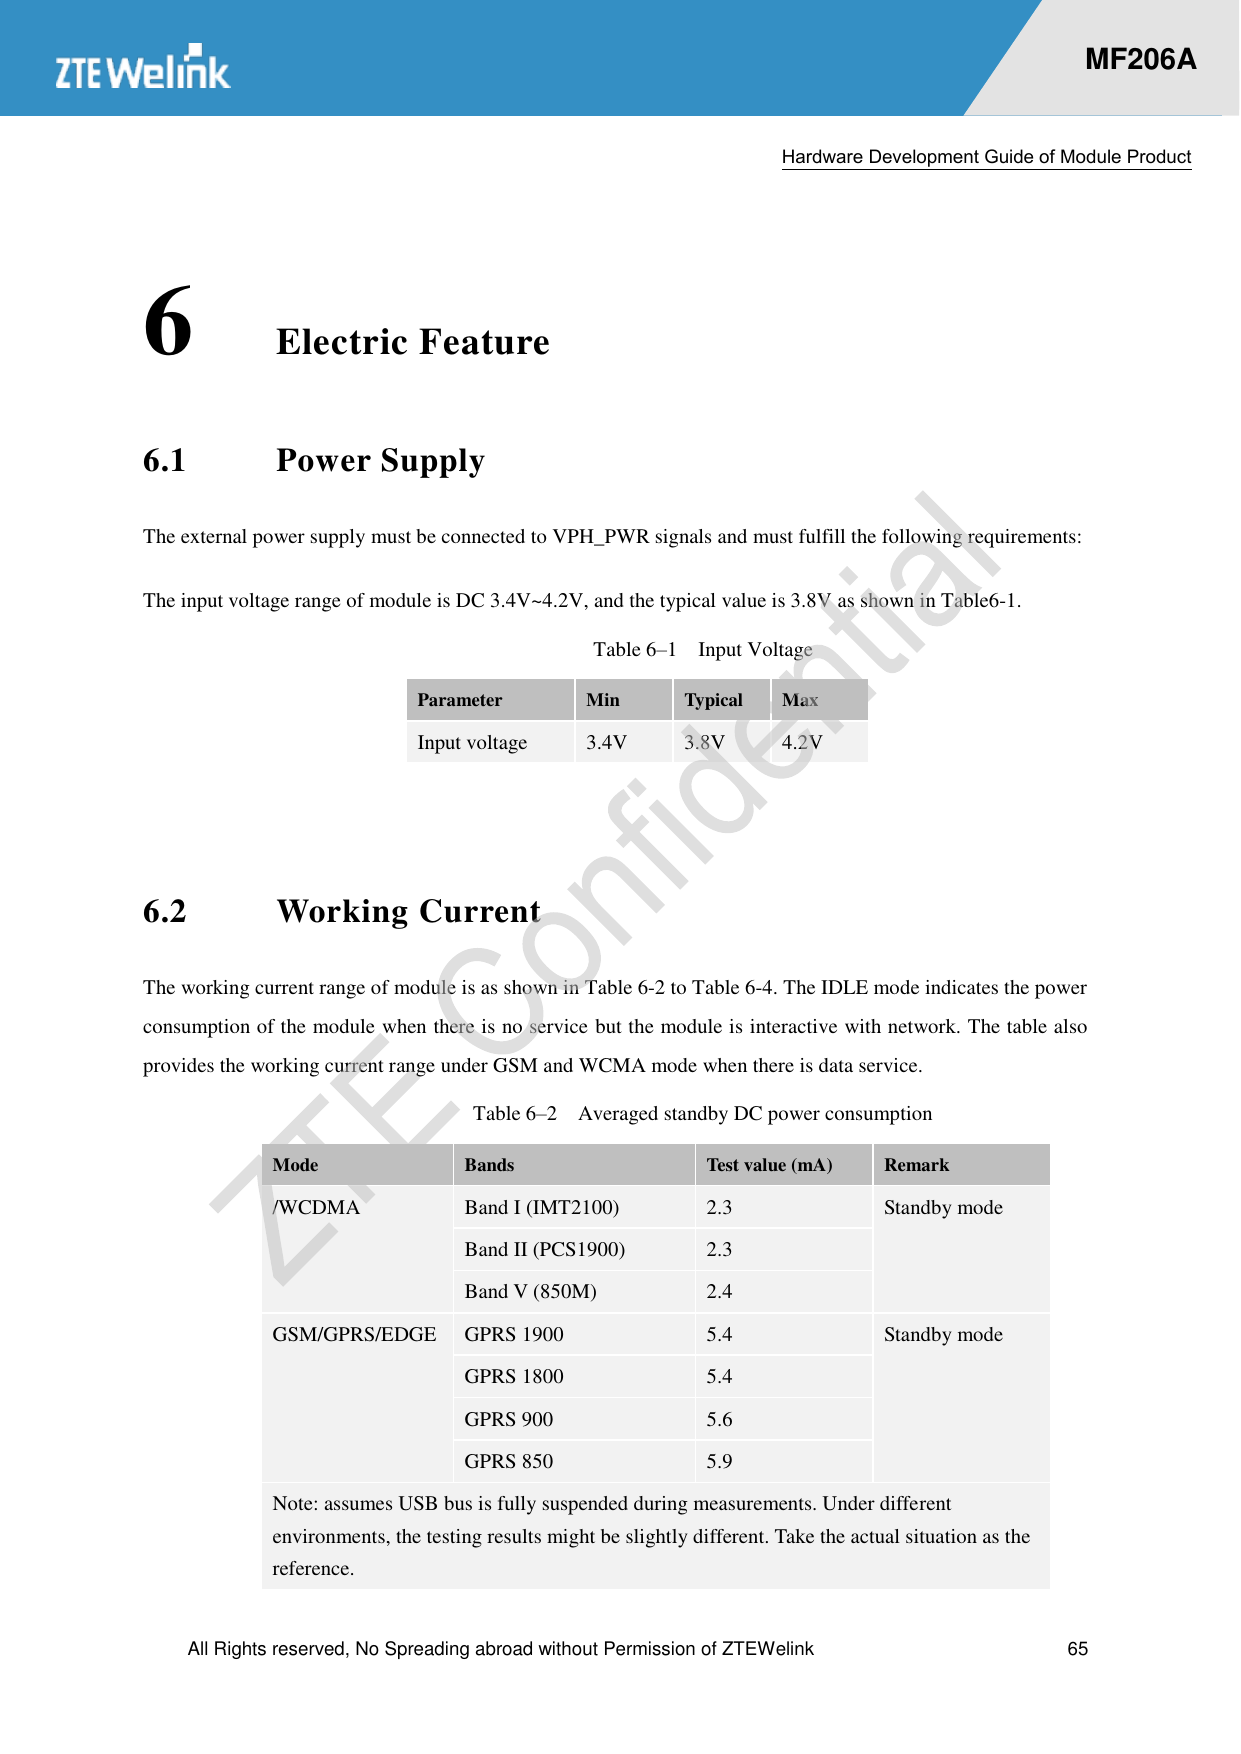  Hardware Development Guide of Module Product  All Rights reserved, No Spreading abroad without Permission of ZTEWelink  65    MF206A 6 Electric Feature 6.1 Power Supply The external power supply must be connected to VPH_PWR signals and must fulfill the following requirements: The input voltage range of module is DC 3.4V~4.2V, and the typical value is 3.8V as shown in Table6-1.   Table 6–1  Input Voltage Parameter Min Typical Max Input voltage 3.4V 3.8V 4.2V  6.2 Working Current The working current range of module is as shown in Table 6-2 to Table 6-4. The IDLE mode indicates the power consumption of the module when there is no service but the module is interactive with network. The table also provides the working current range under GSM and WCMA mode when there is data service.   Table 6–2  Averaged standby DC power consumption Mode Bands Test value (mA) Remark /WCDMA Band I (IMT2100) 2.3 Standby mode Band II (PCS1900) 2.3 Band V (850M) 2.4 GSM/GPRS/EDGE GPRS 1900 5.4 Standby mode GPRS 1800 5.4 GPRS 900 5.6 GPRS 850 5.9 Note: assumes USB bus is fully suspended during measurements. Under different environments, the testing results might be slightly different. Take the actual situation as the reference. 